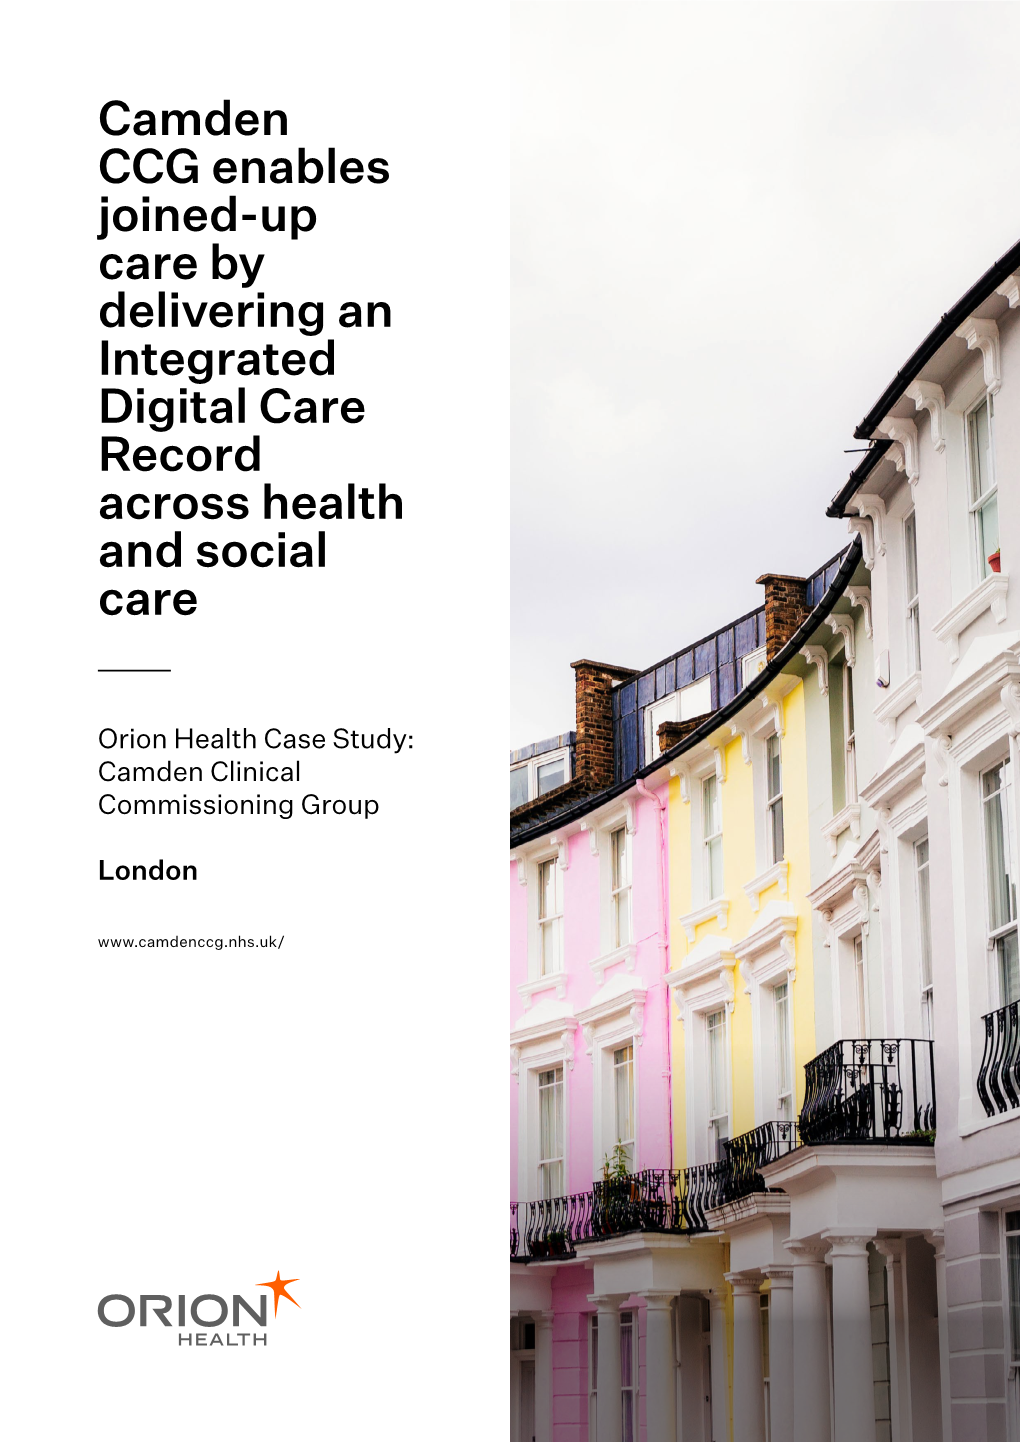 Camden CCG Enables Joined-Up Care by Delivering an Integrated Digital Care Record Across Health and Social Care